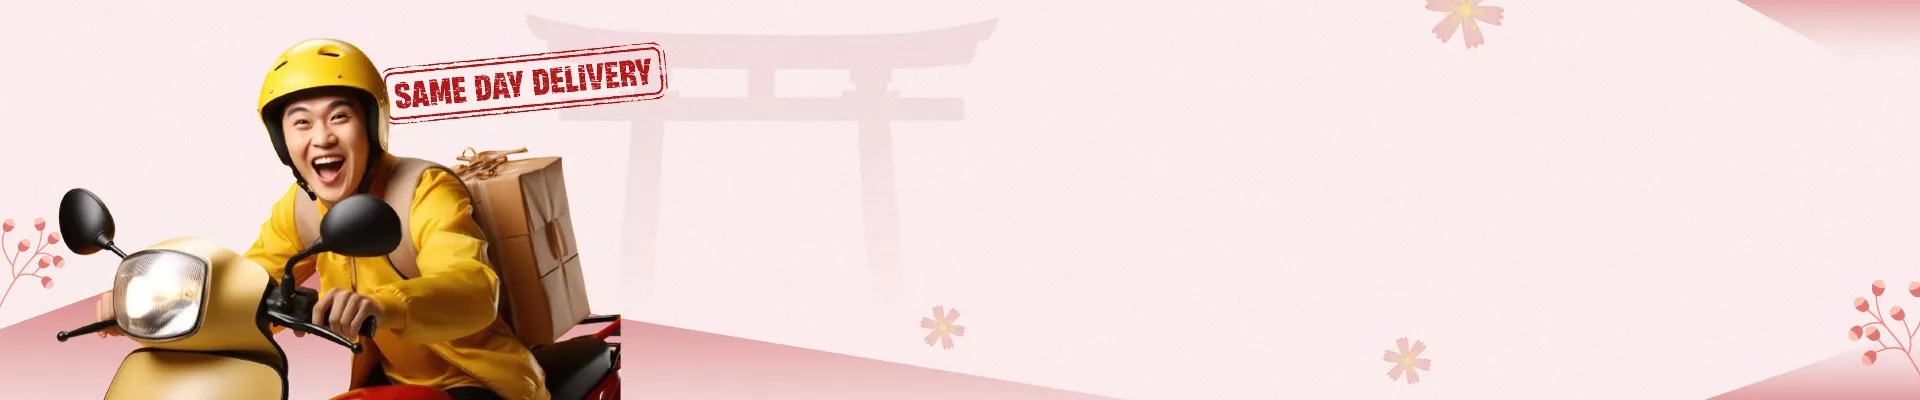 Send Flowers and Gifts on Sameday to Japan